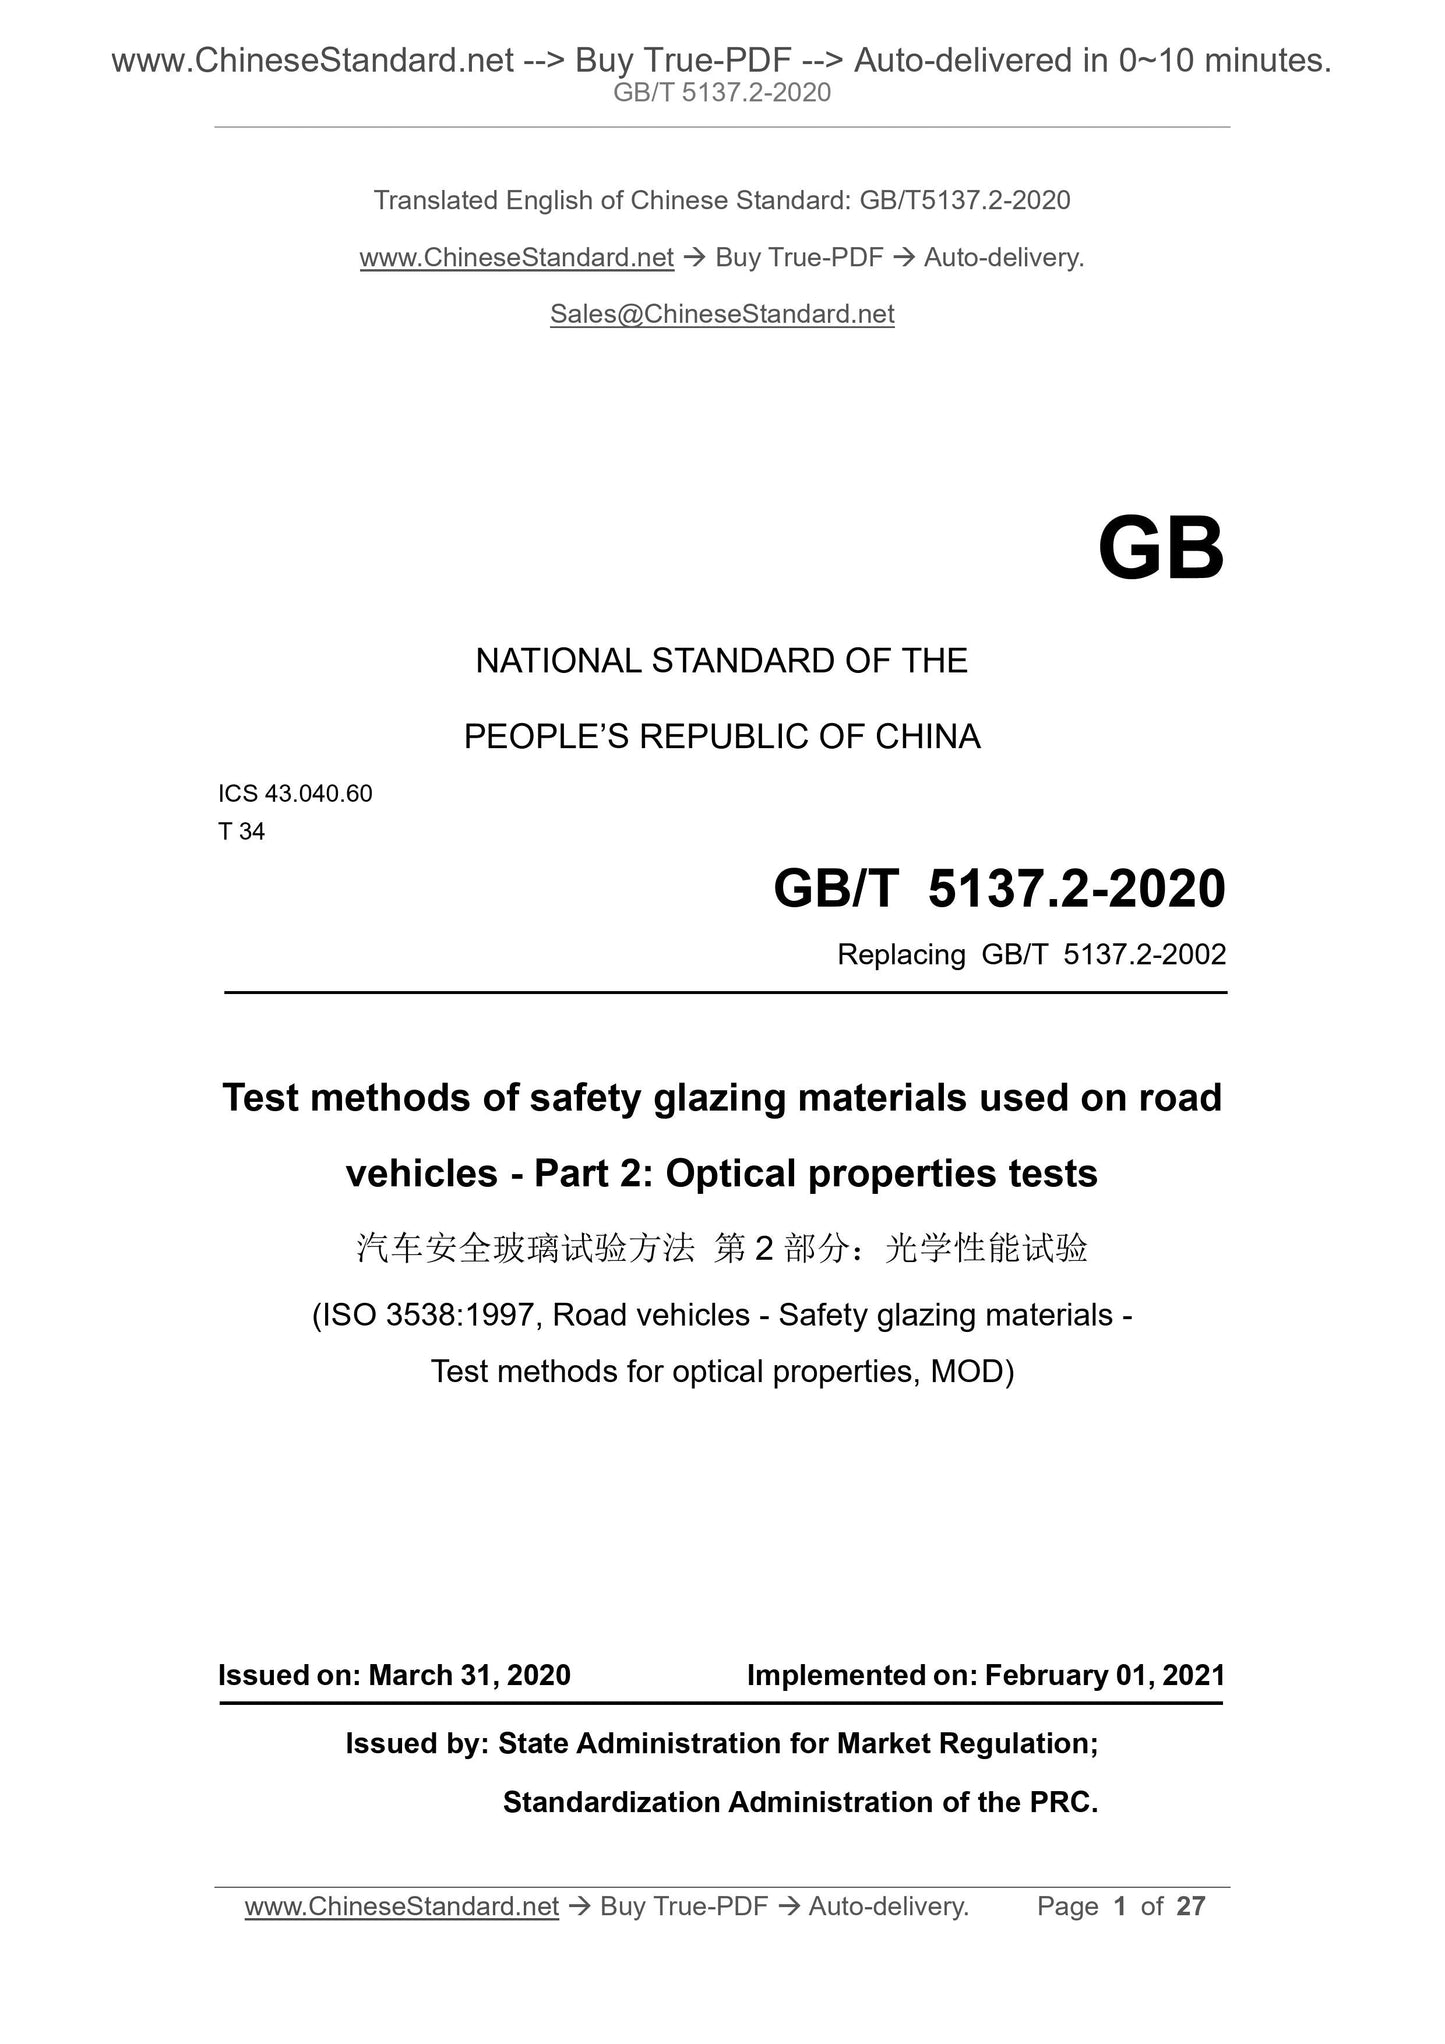 GB/T 5137.2-2020 Page 1